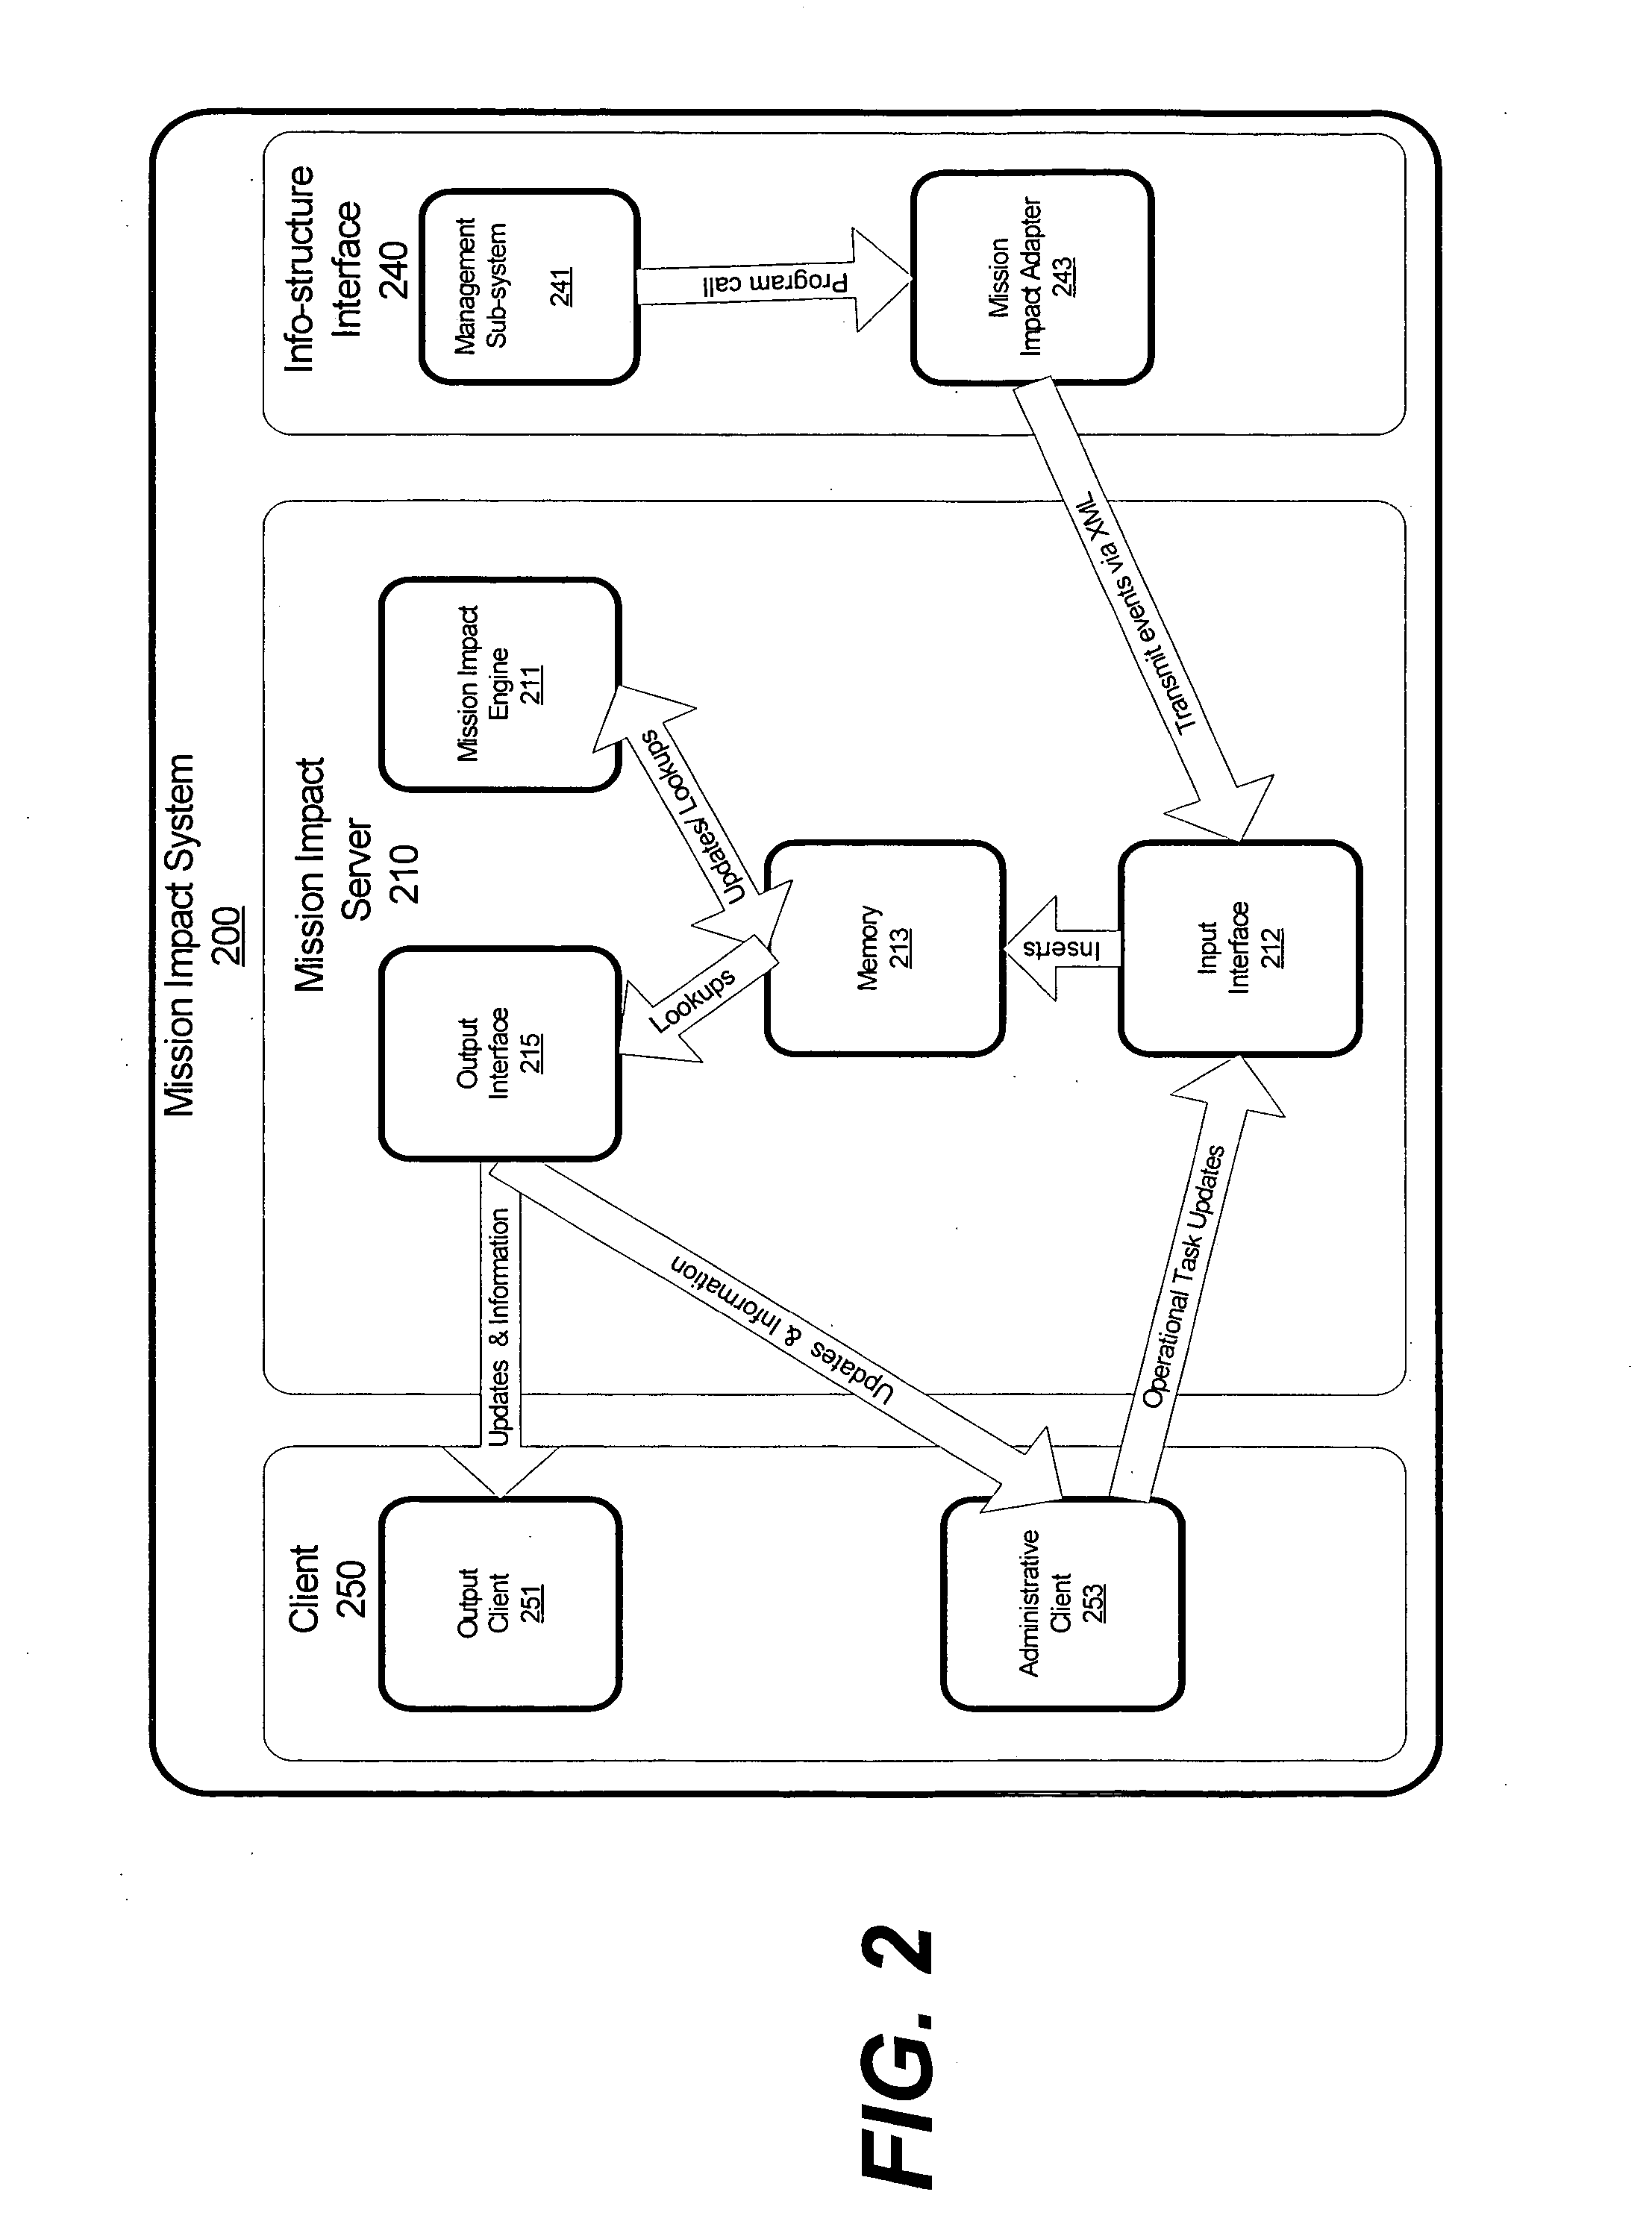 System and method for providing a mission based management system